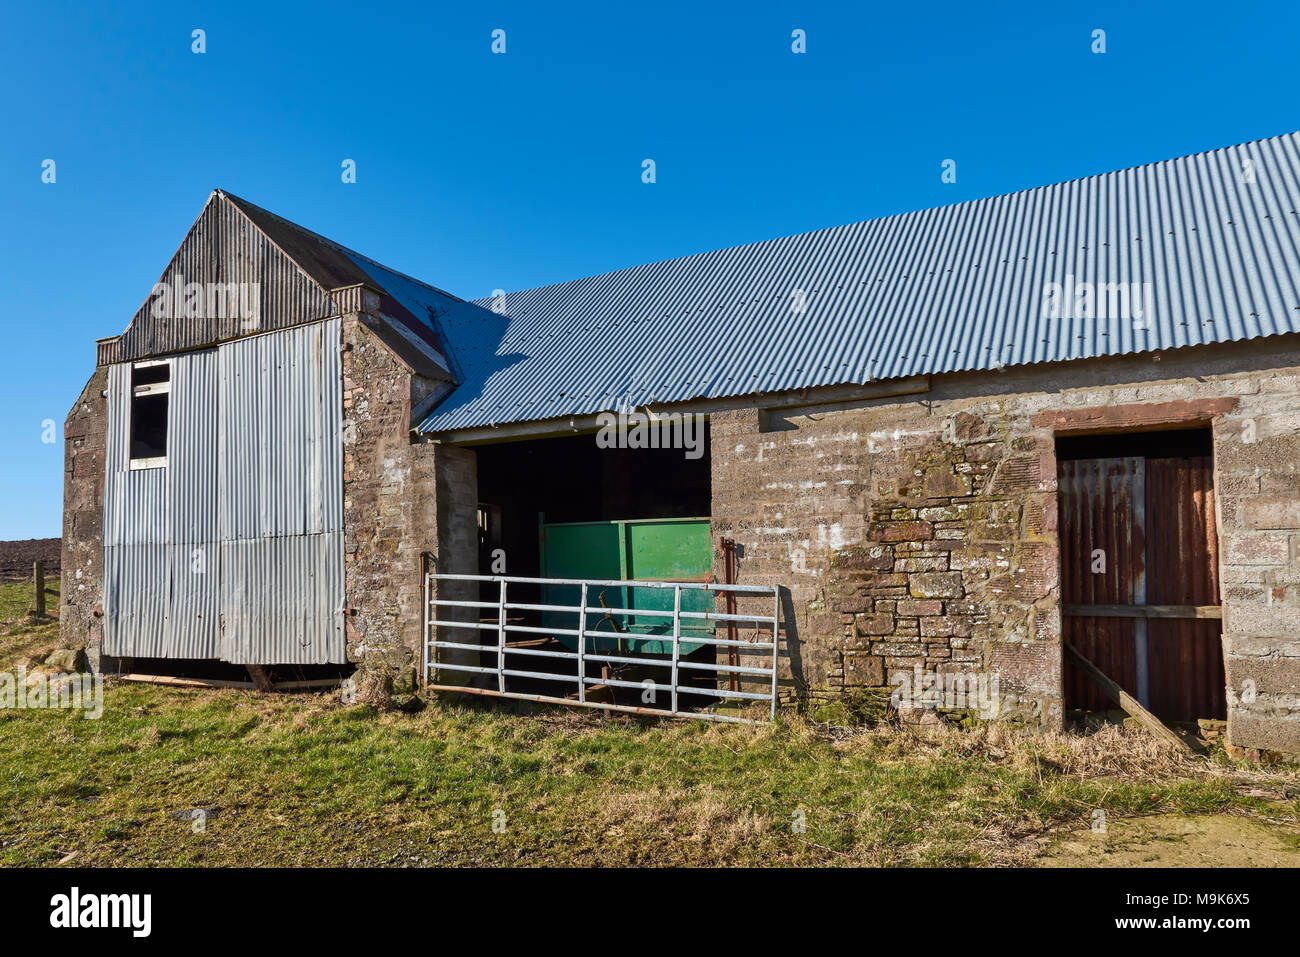 A Green Farm Trailer lies parked within this old Farm Steading, secured only by a simple Farm Gate across a Double Doorway under a corrugated Roof. Stock Photo